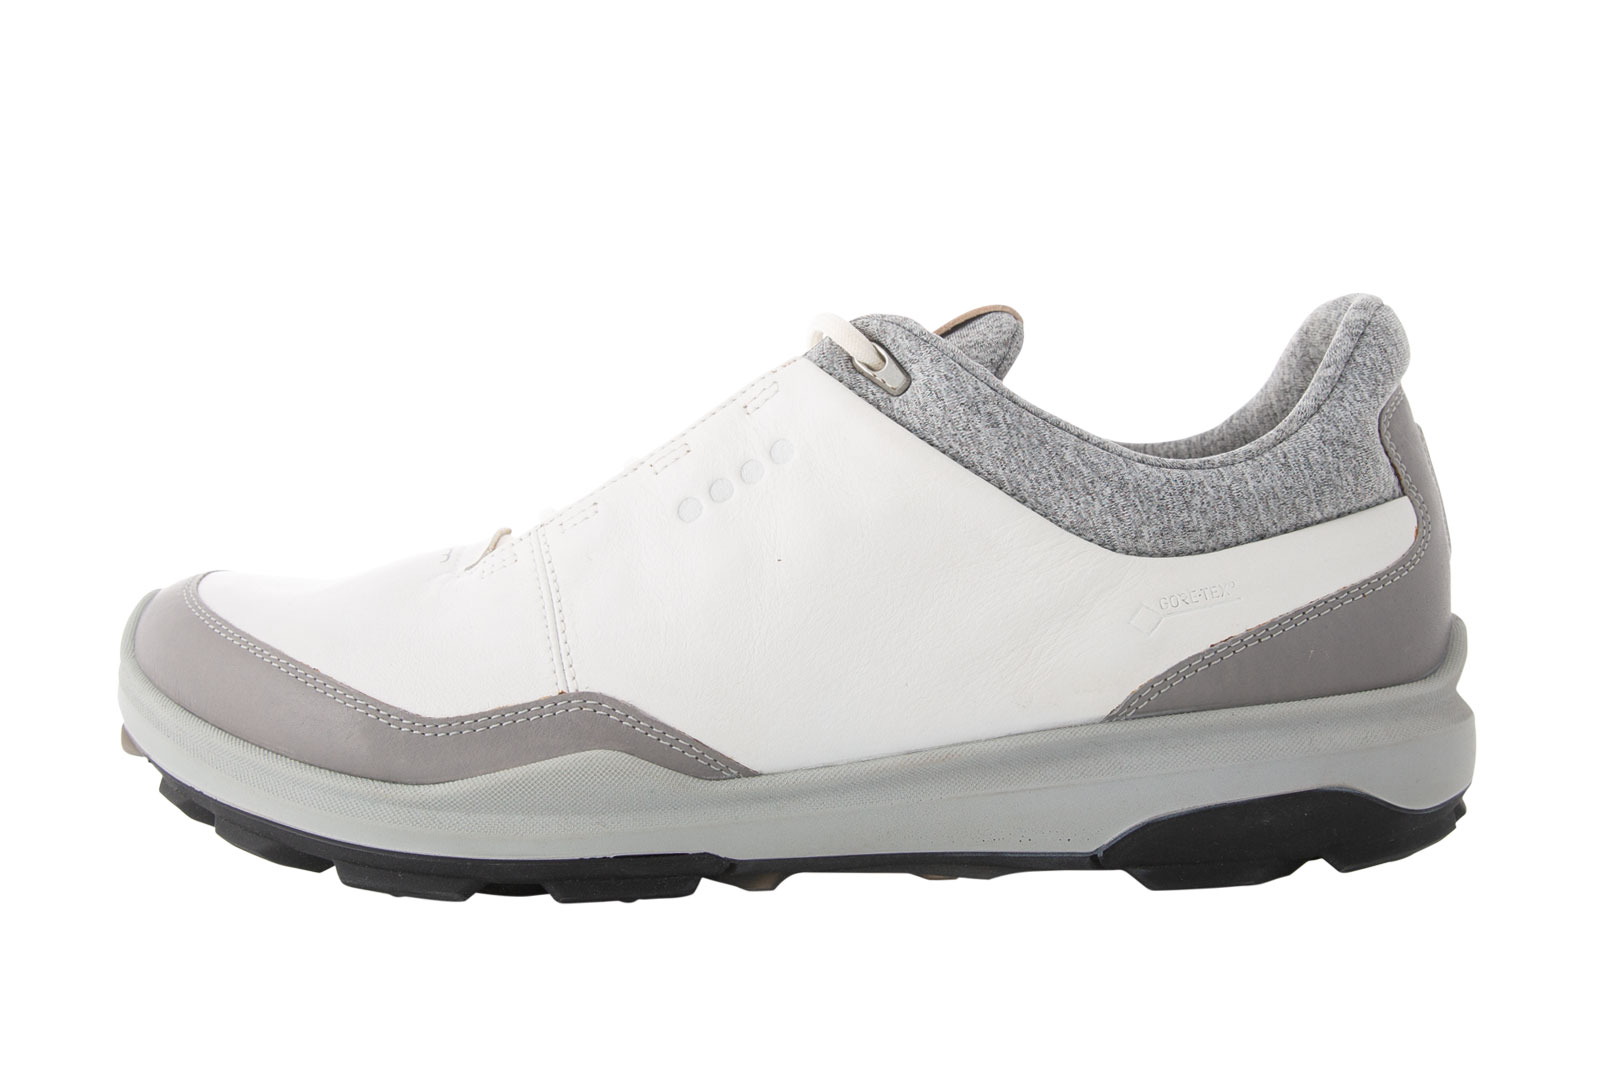 2018: BIOM HYBRID 3 the shoe started an new era in ECCO GOLF's design with the GORE-TEX construction